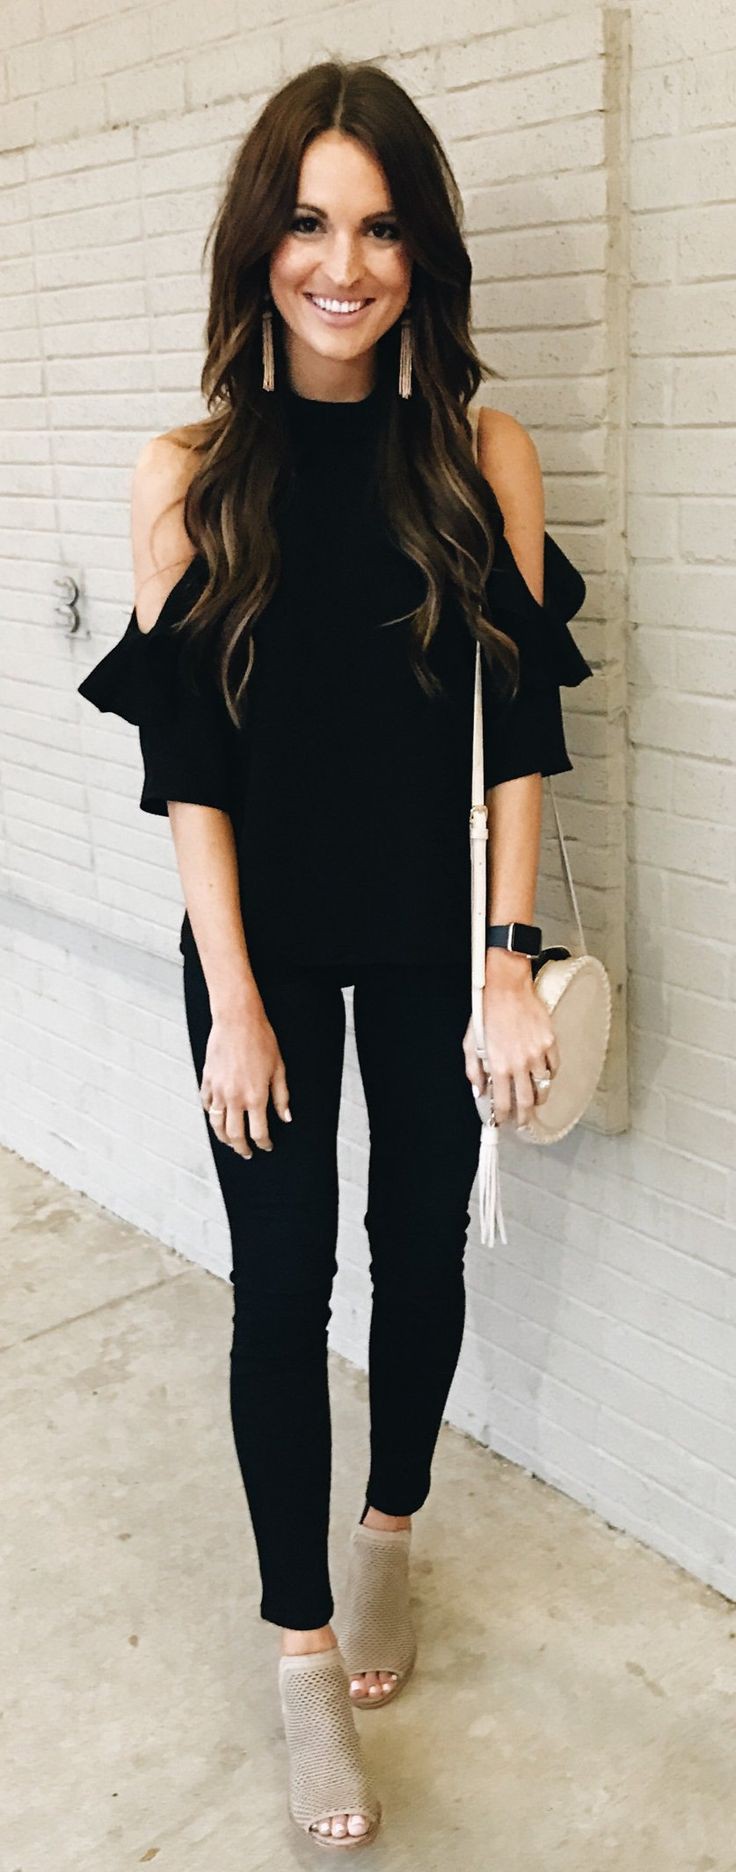 black jeans and top outfit